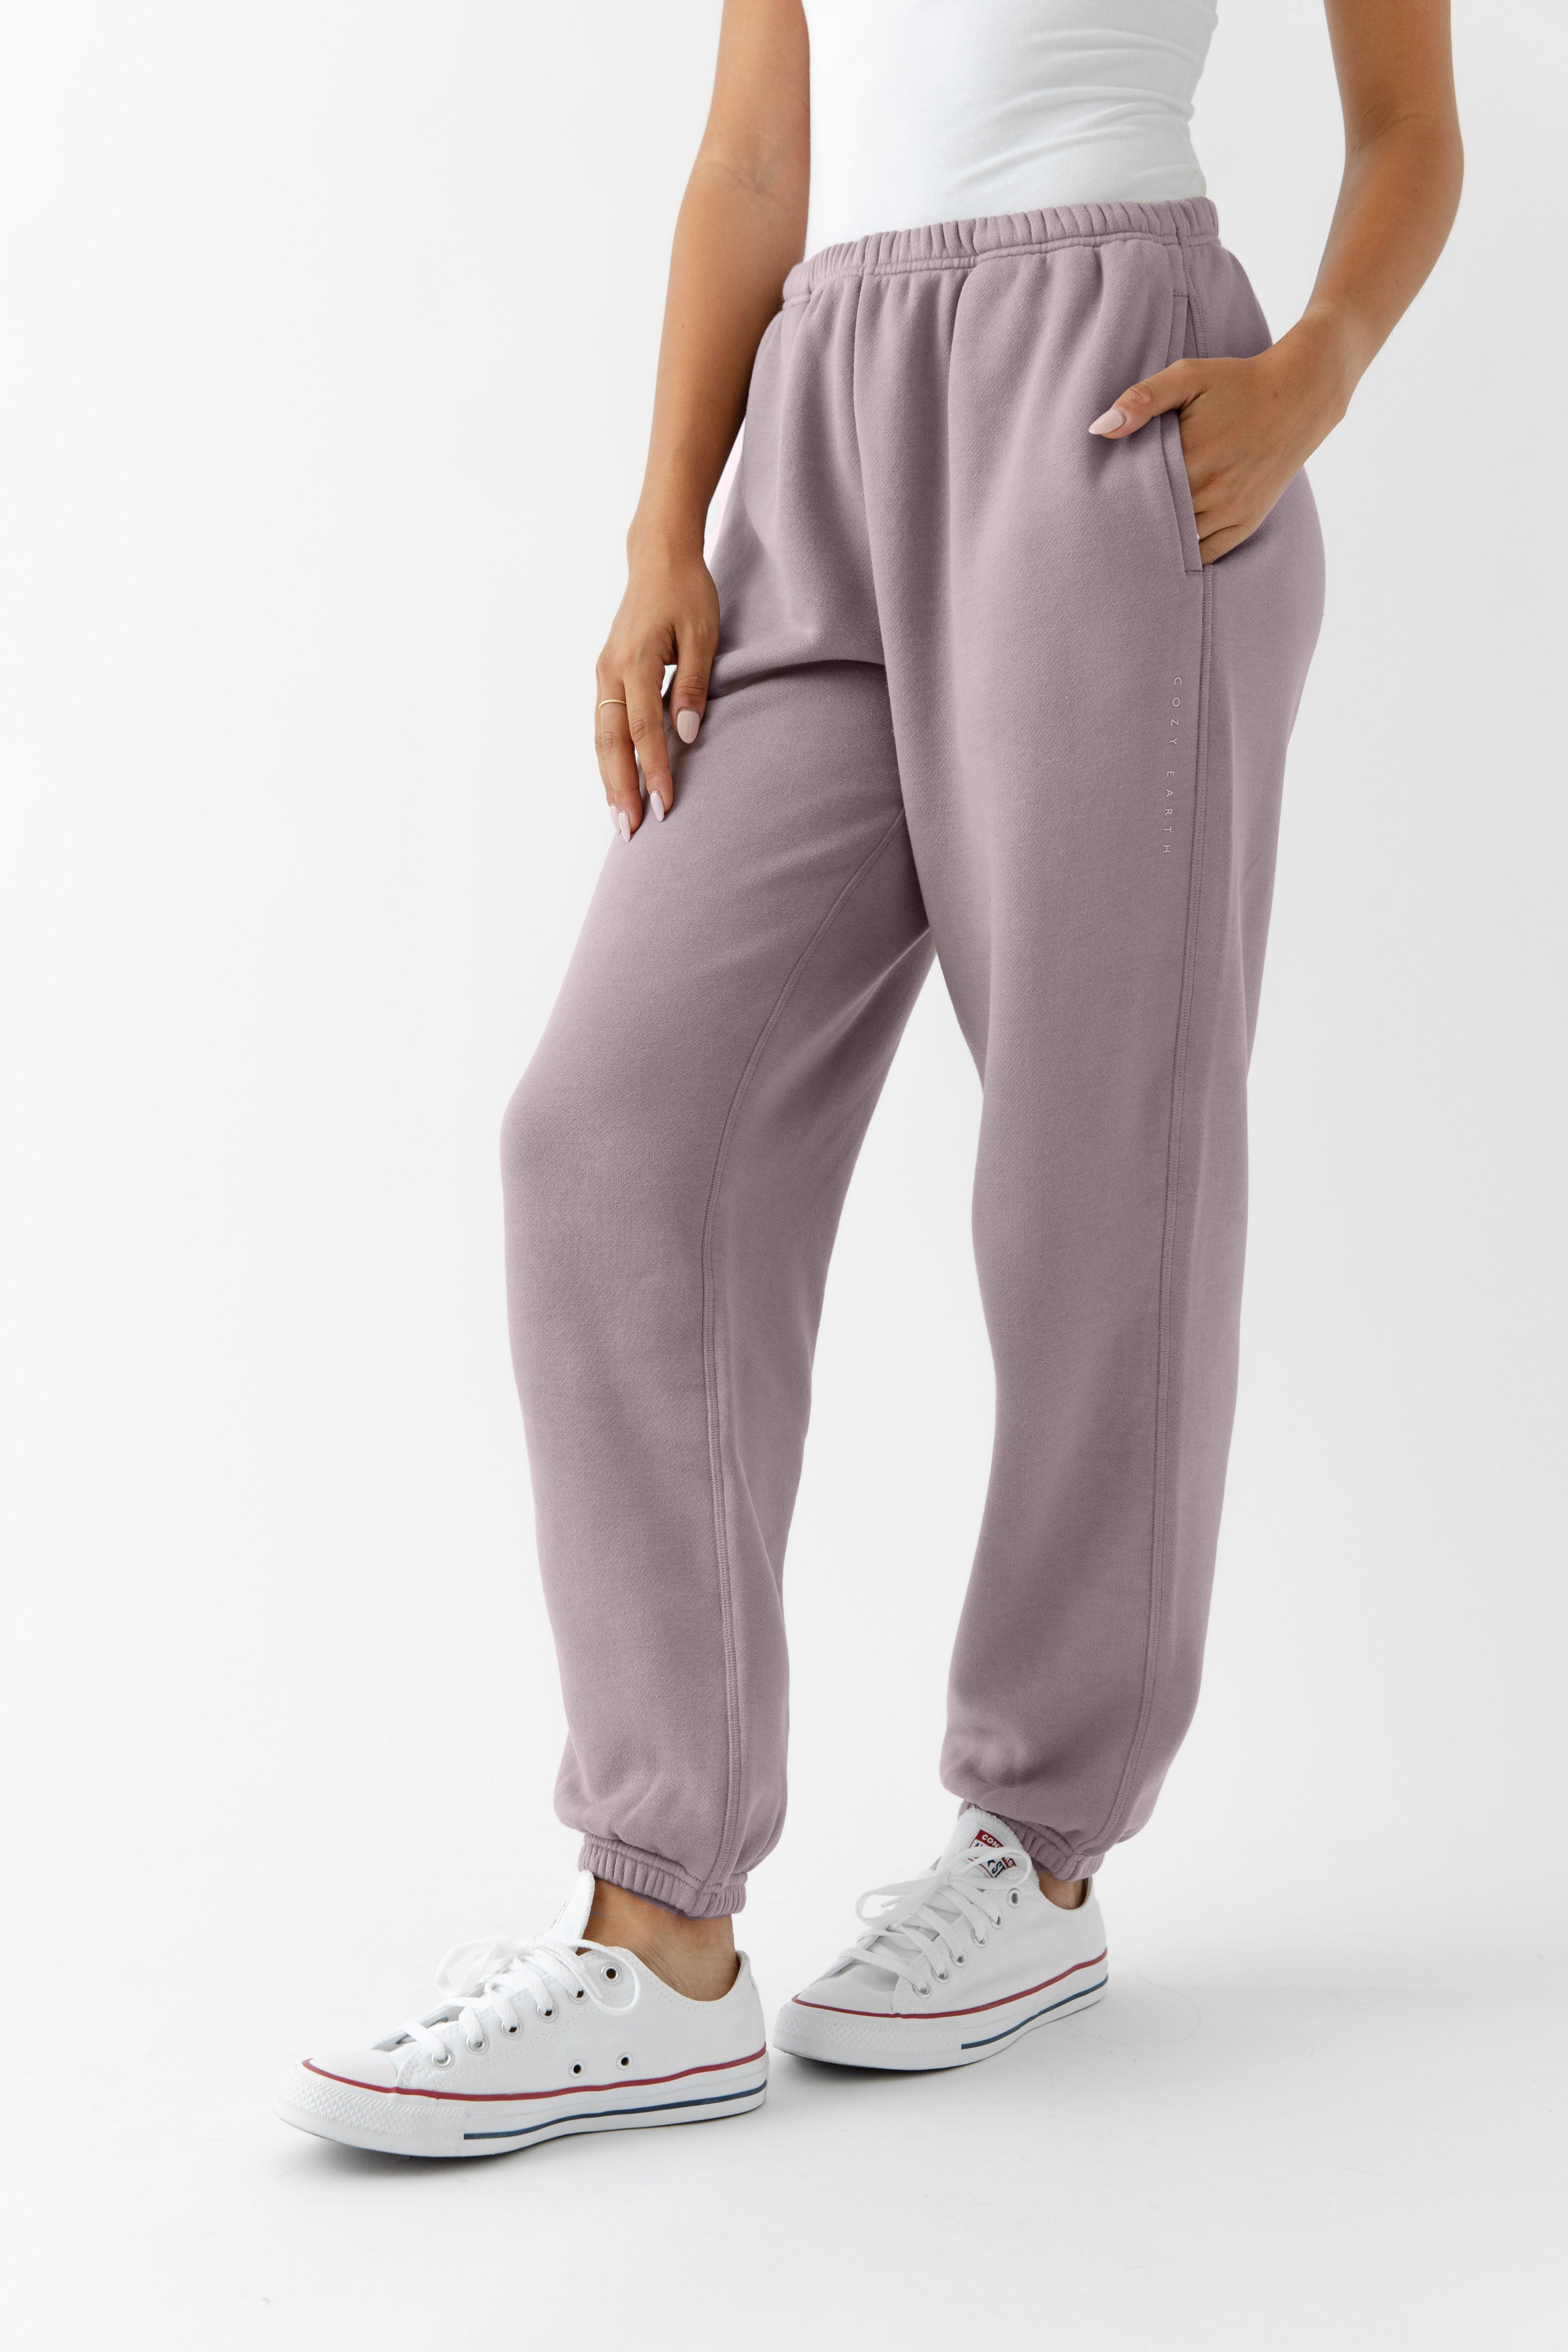 Dusty Orchid CityScape Joggers. The Joggers are being worn by a female model. The photo is taken from the waist down with the models hand in the pocket of the joggers. The back ground is white. |Color:Dusty Orchid